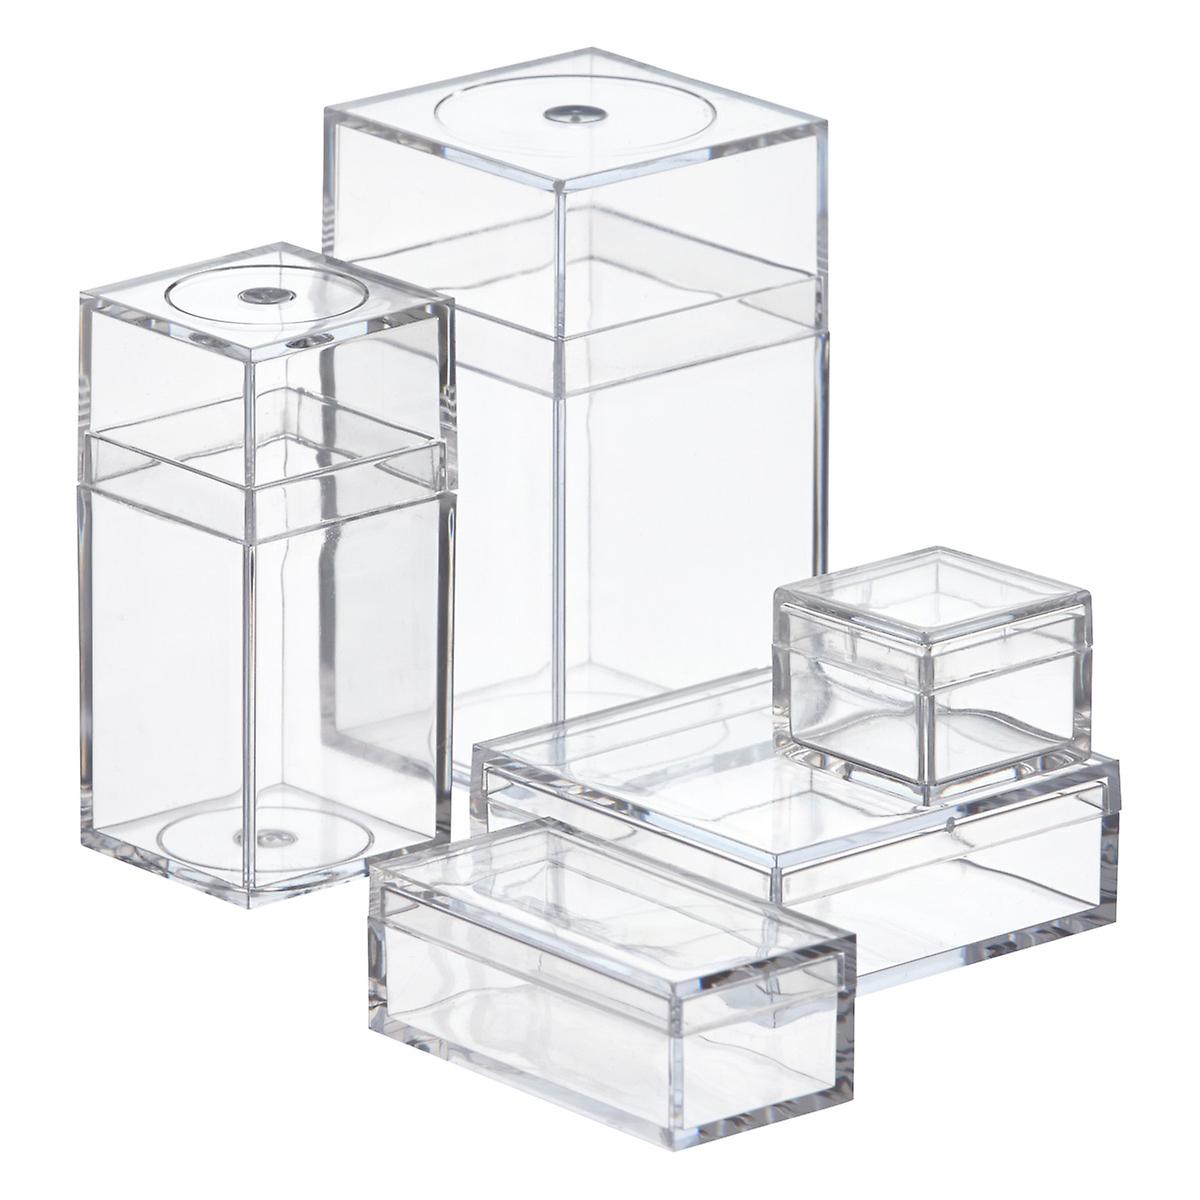 Small Clear Amac Boxes The Container, Clear Storage Boxes Small